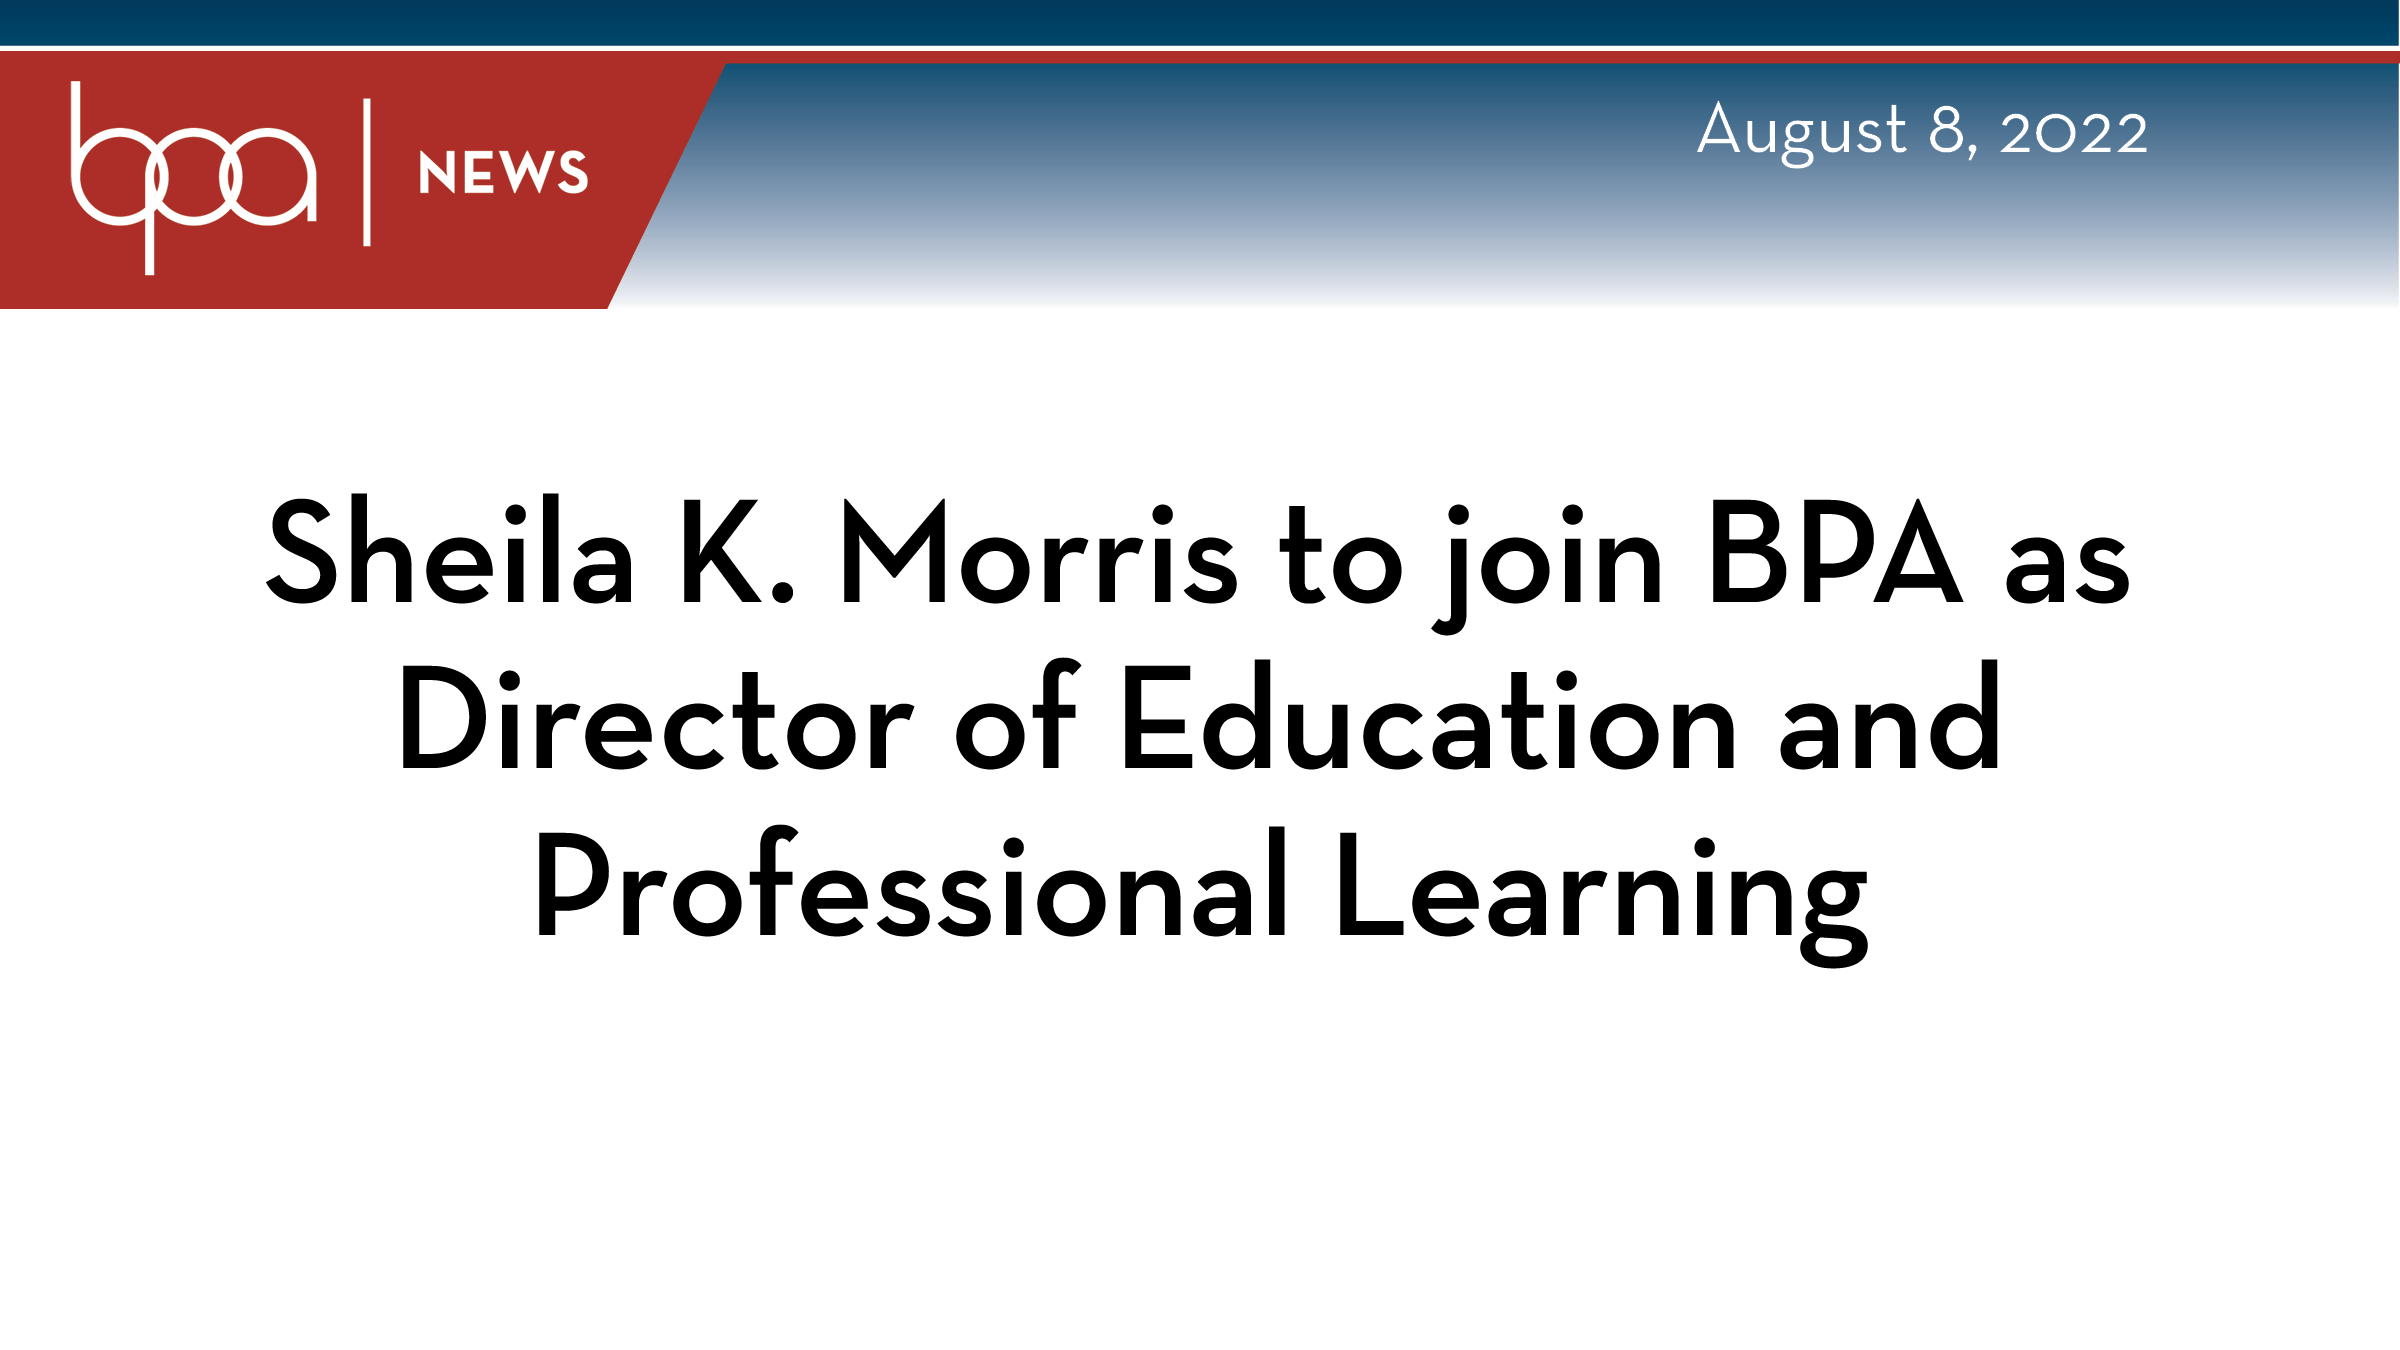 Sheila K. Morris to join BPA as the Director of Education and Professional Learning